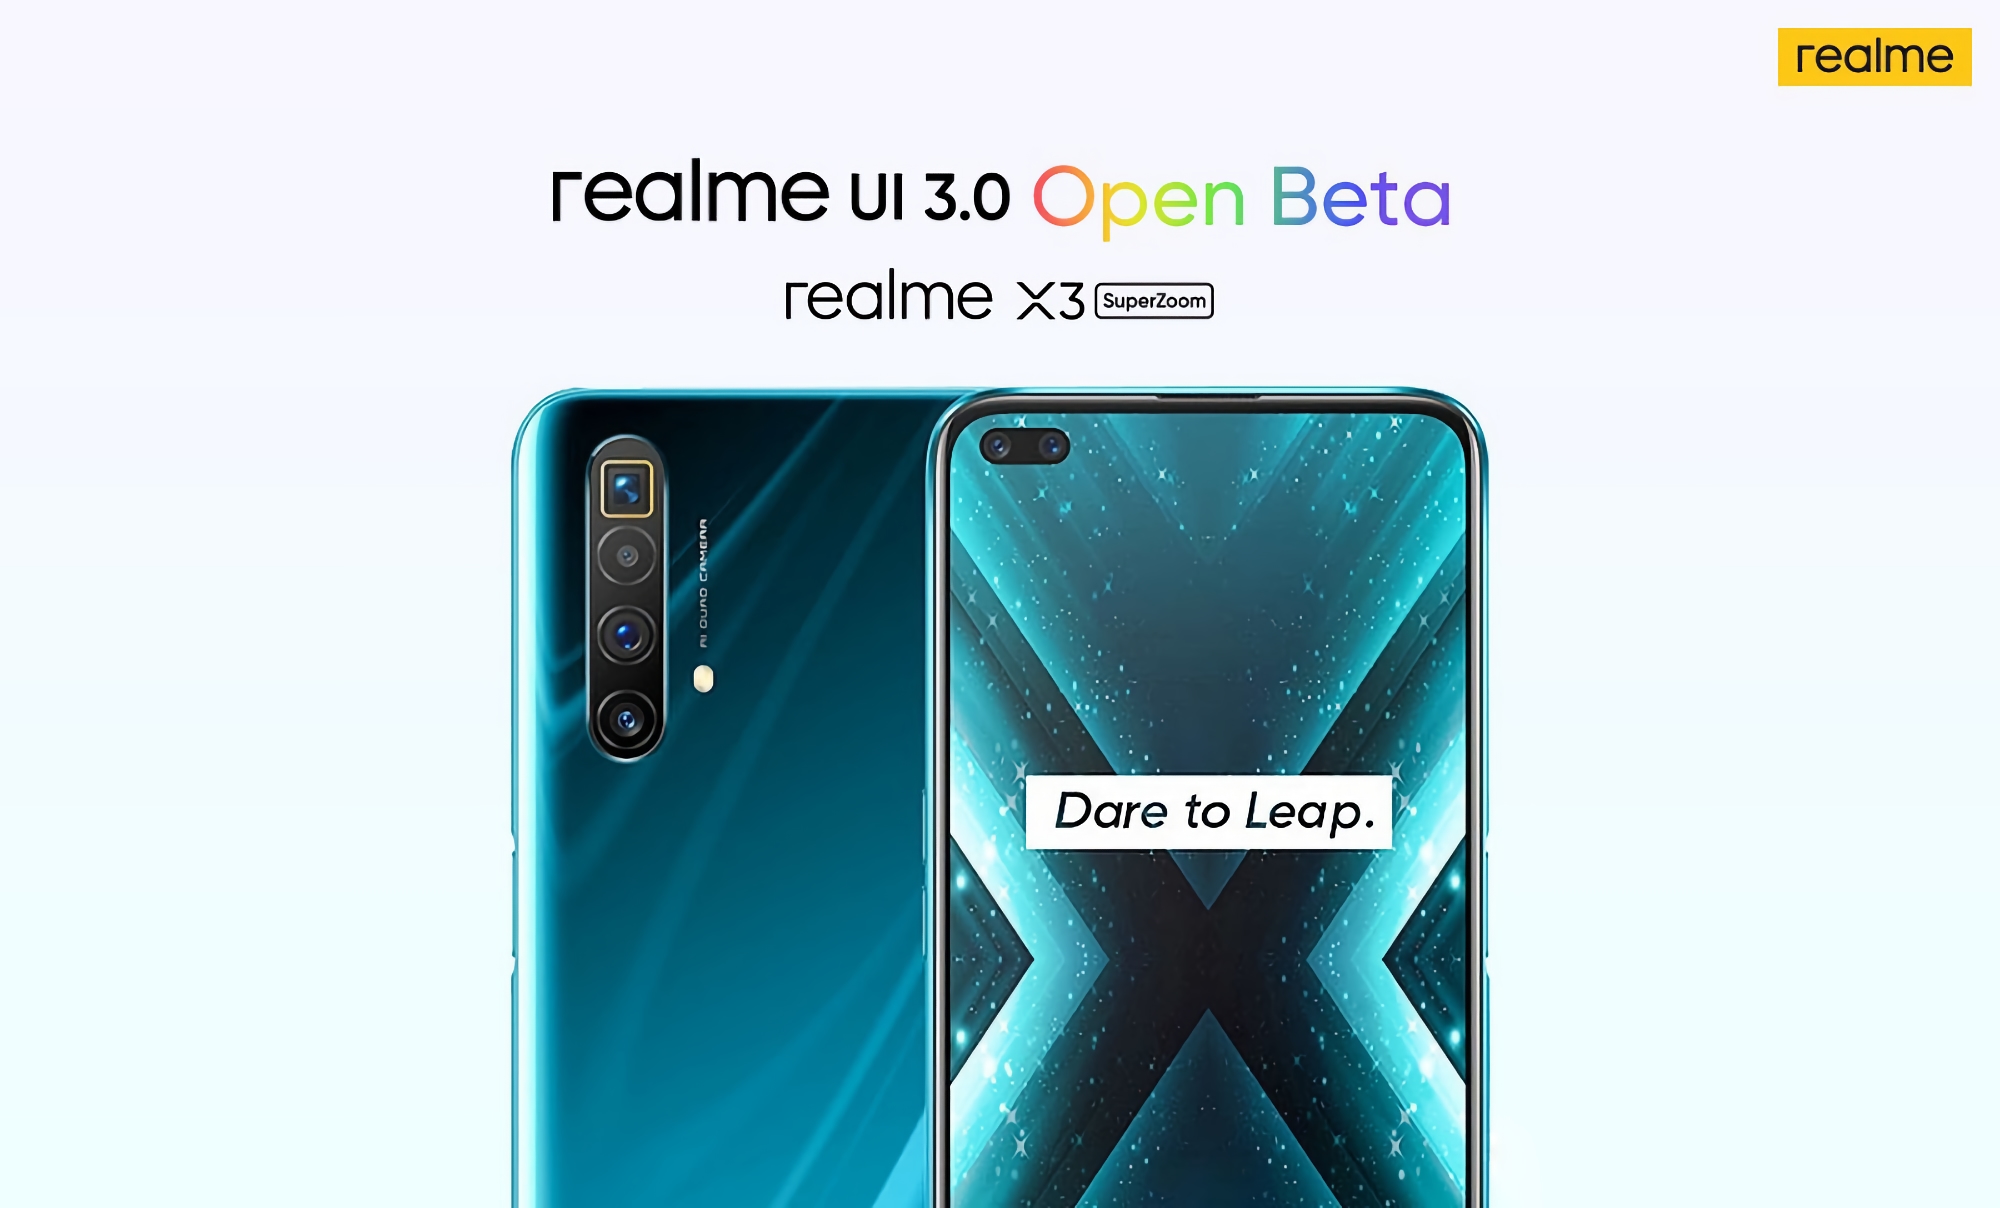 realme X3 SuperZoom got a beta version of realme UI 3.0 based on Android 12